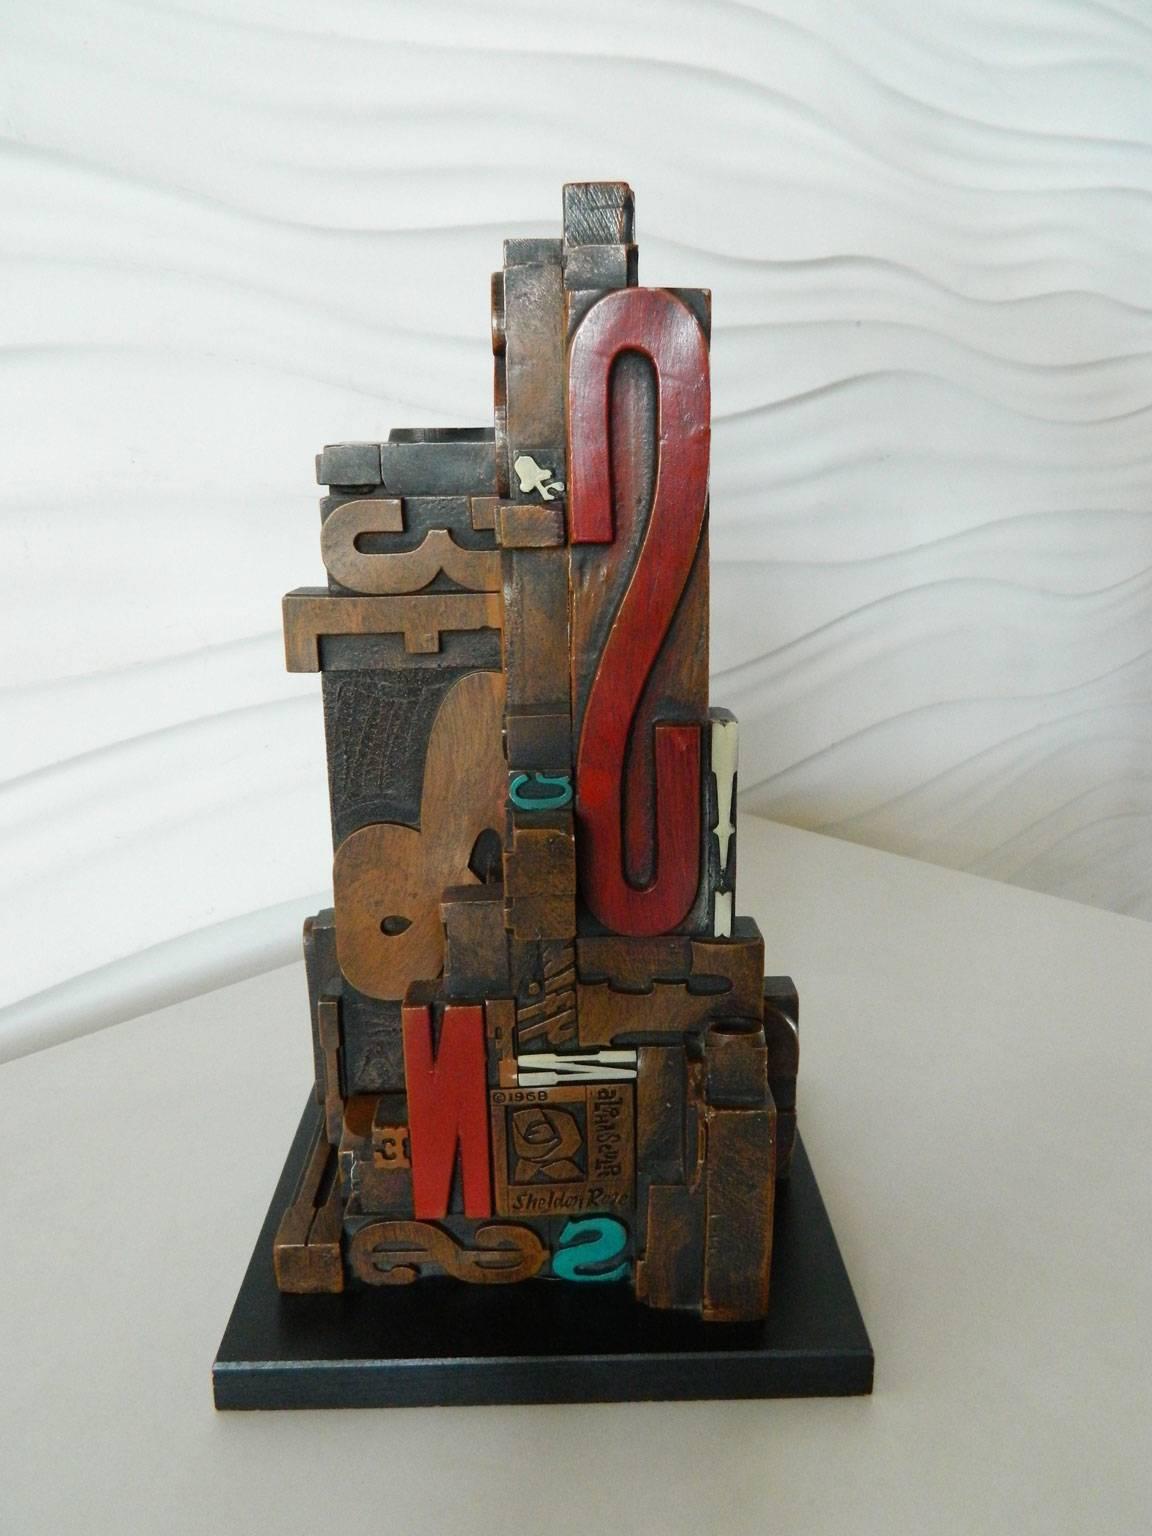 20th Century Mid-Century Modern Industrial Typeface Sculpture by Sheldon Rose